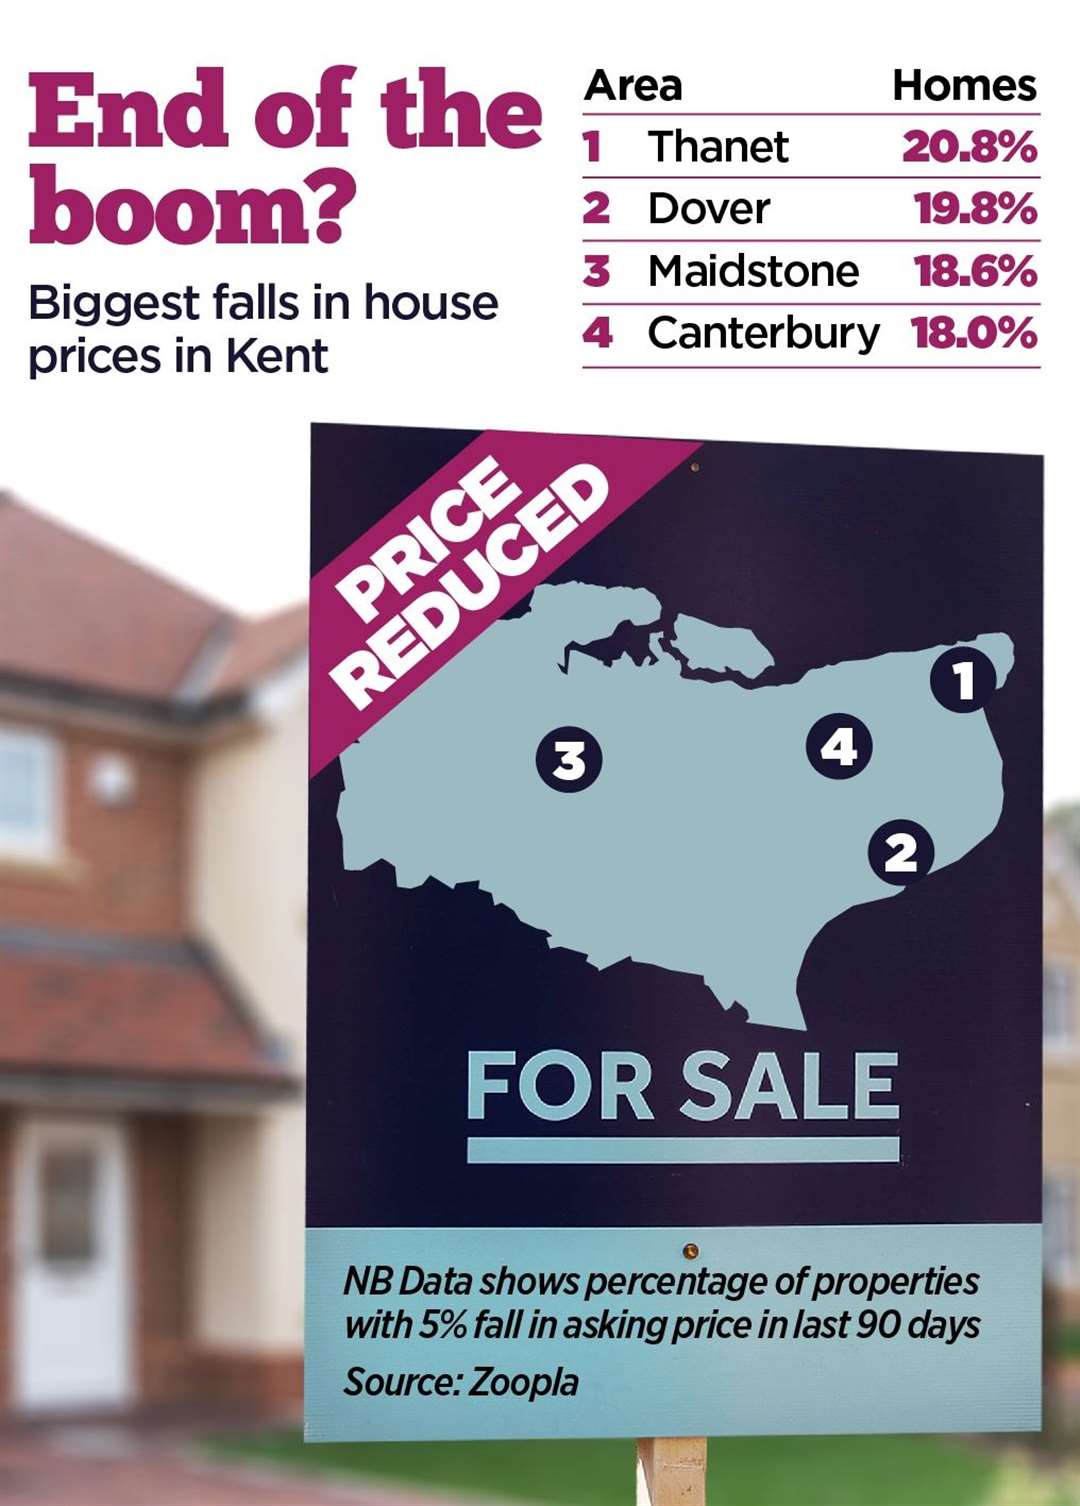 The Kent districts with the highest percentage of major cuts to property asking prices